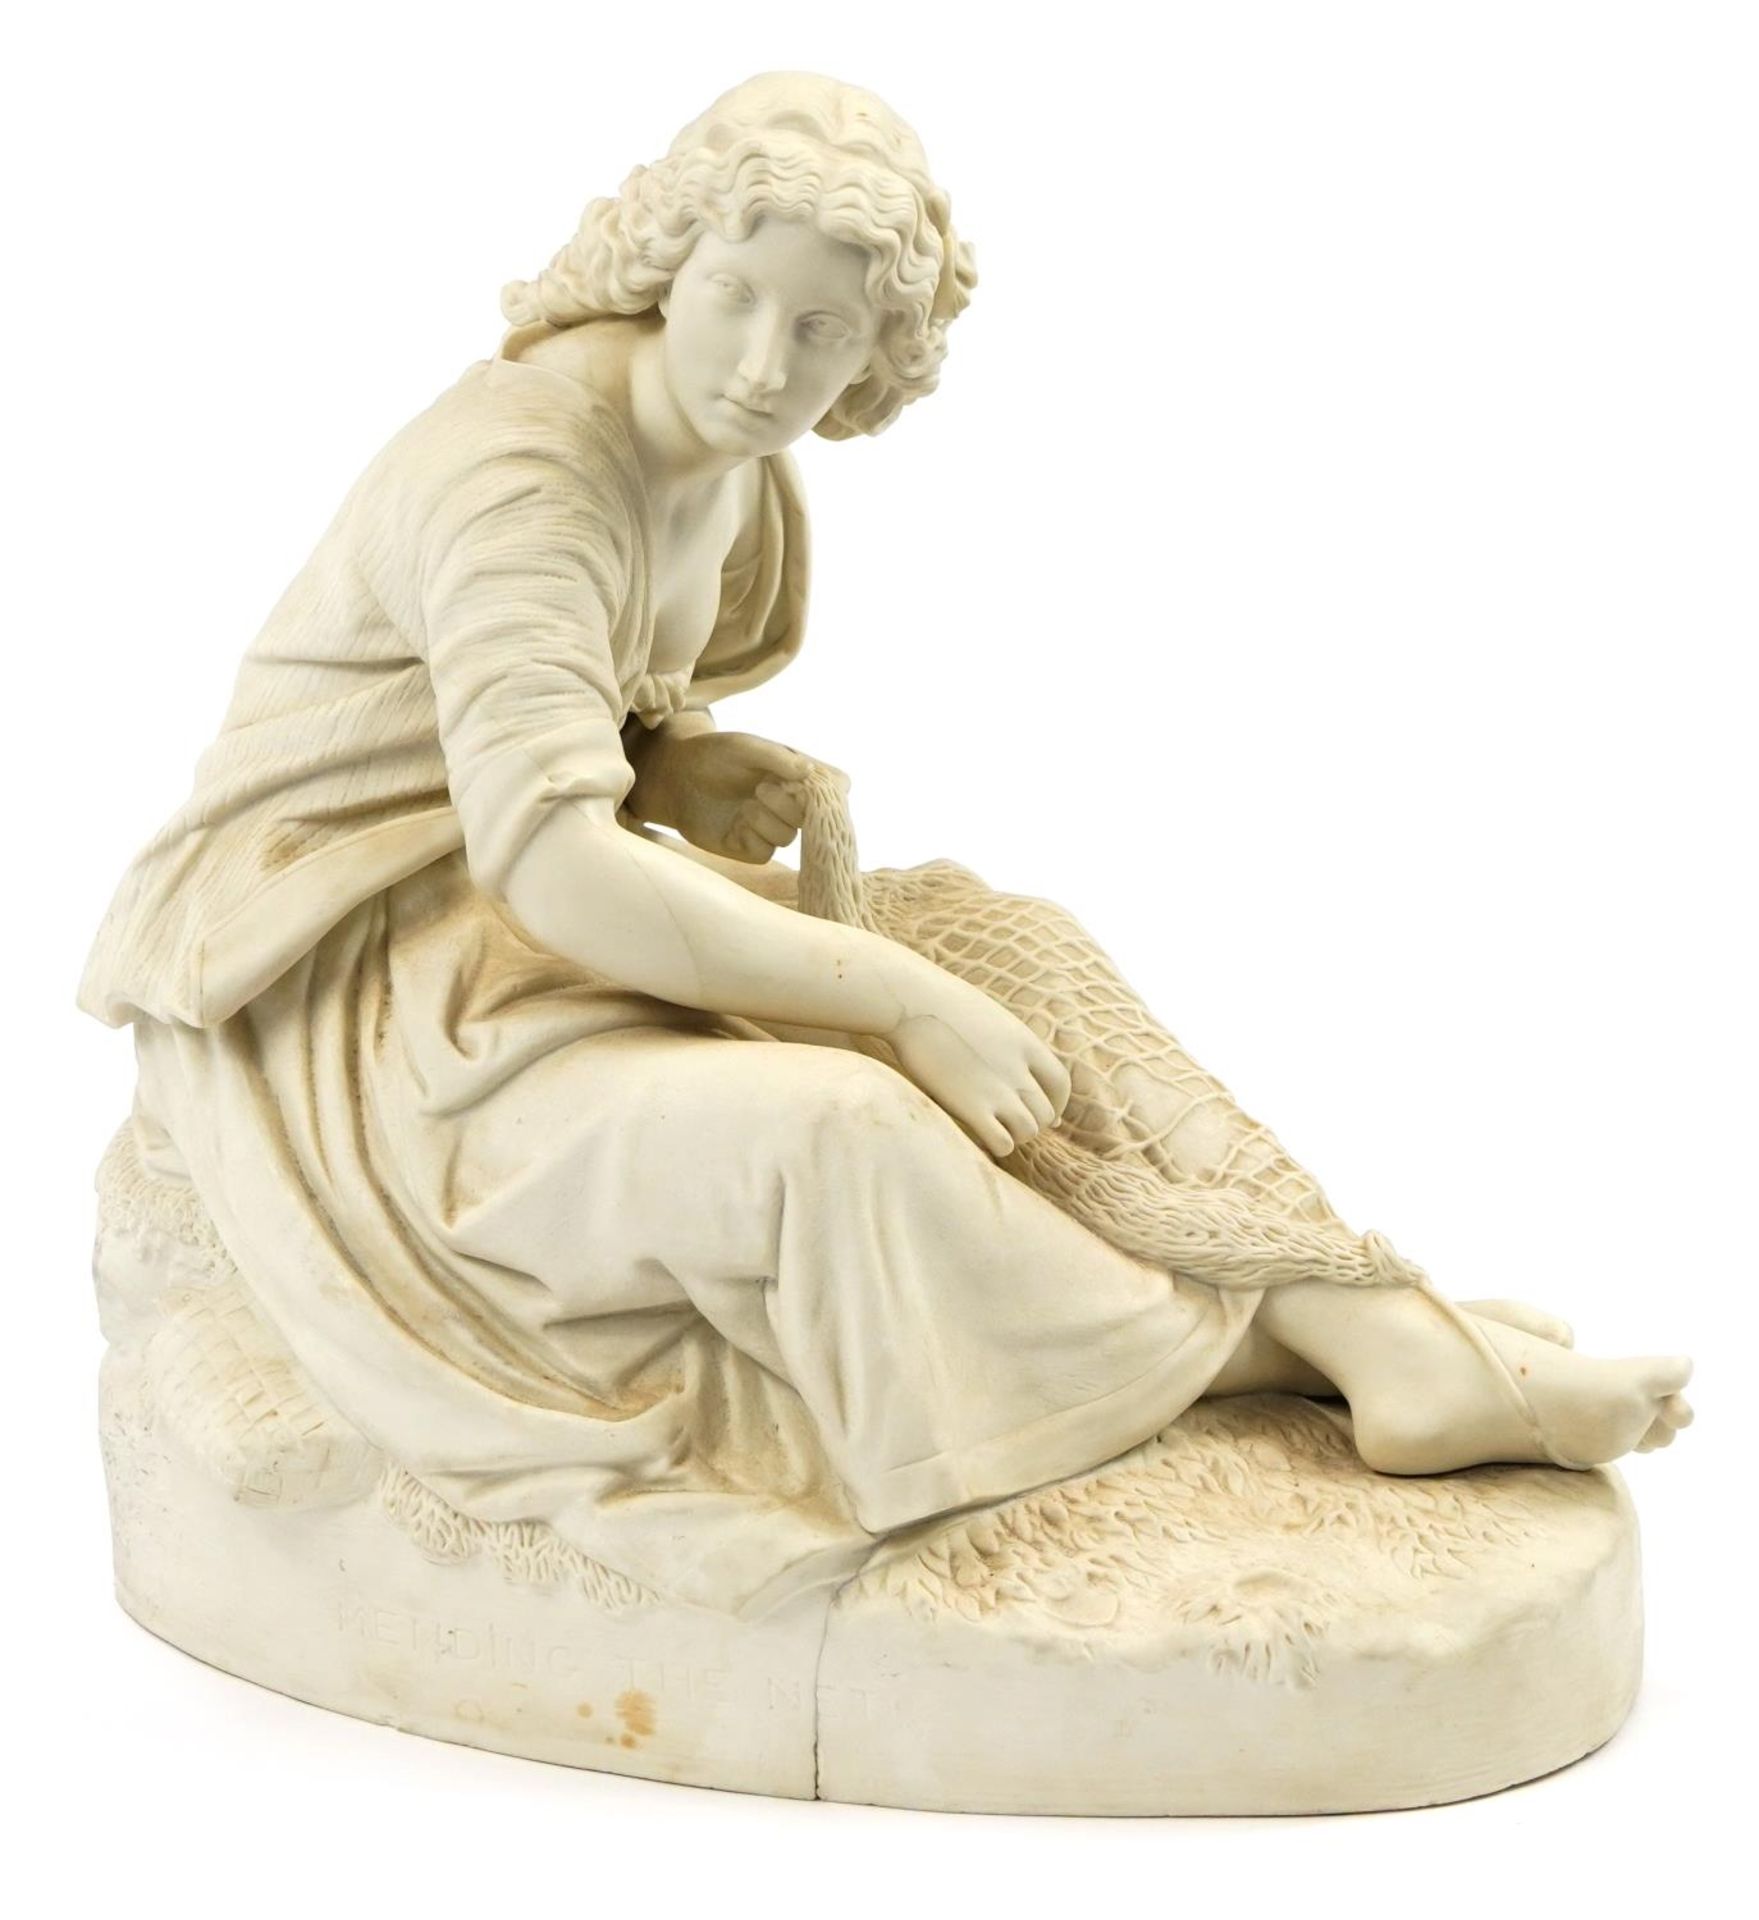 After Edward William Wyon, Victorian Copeland parian ware figure Mending the Net, produced for The